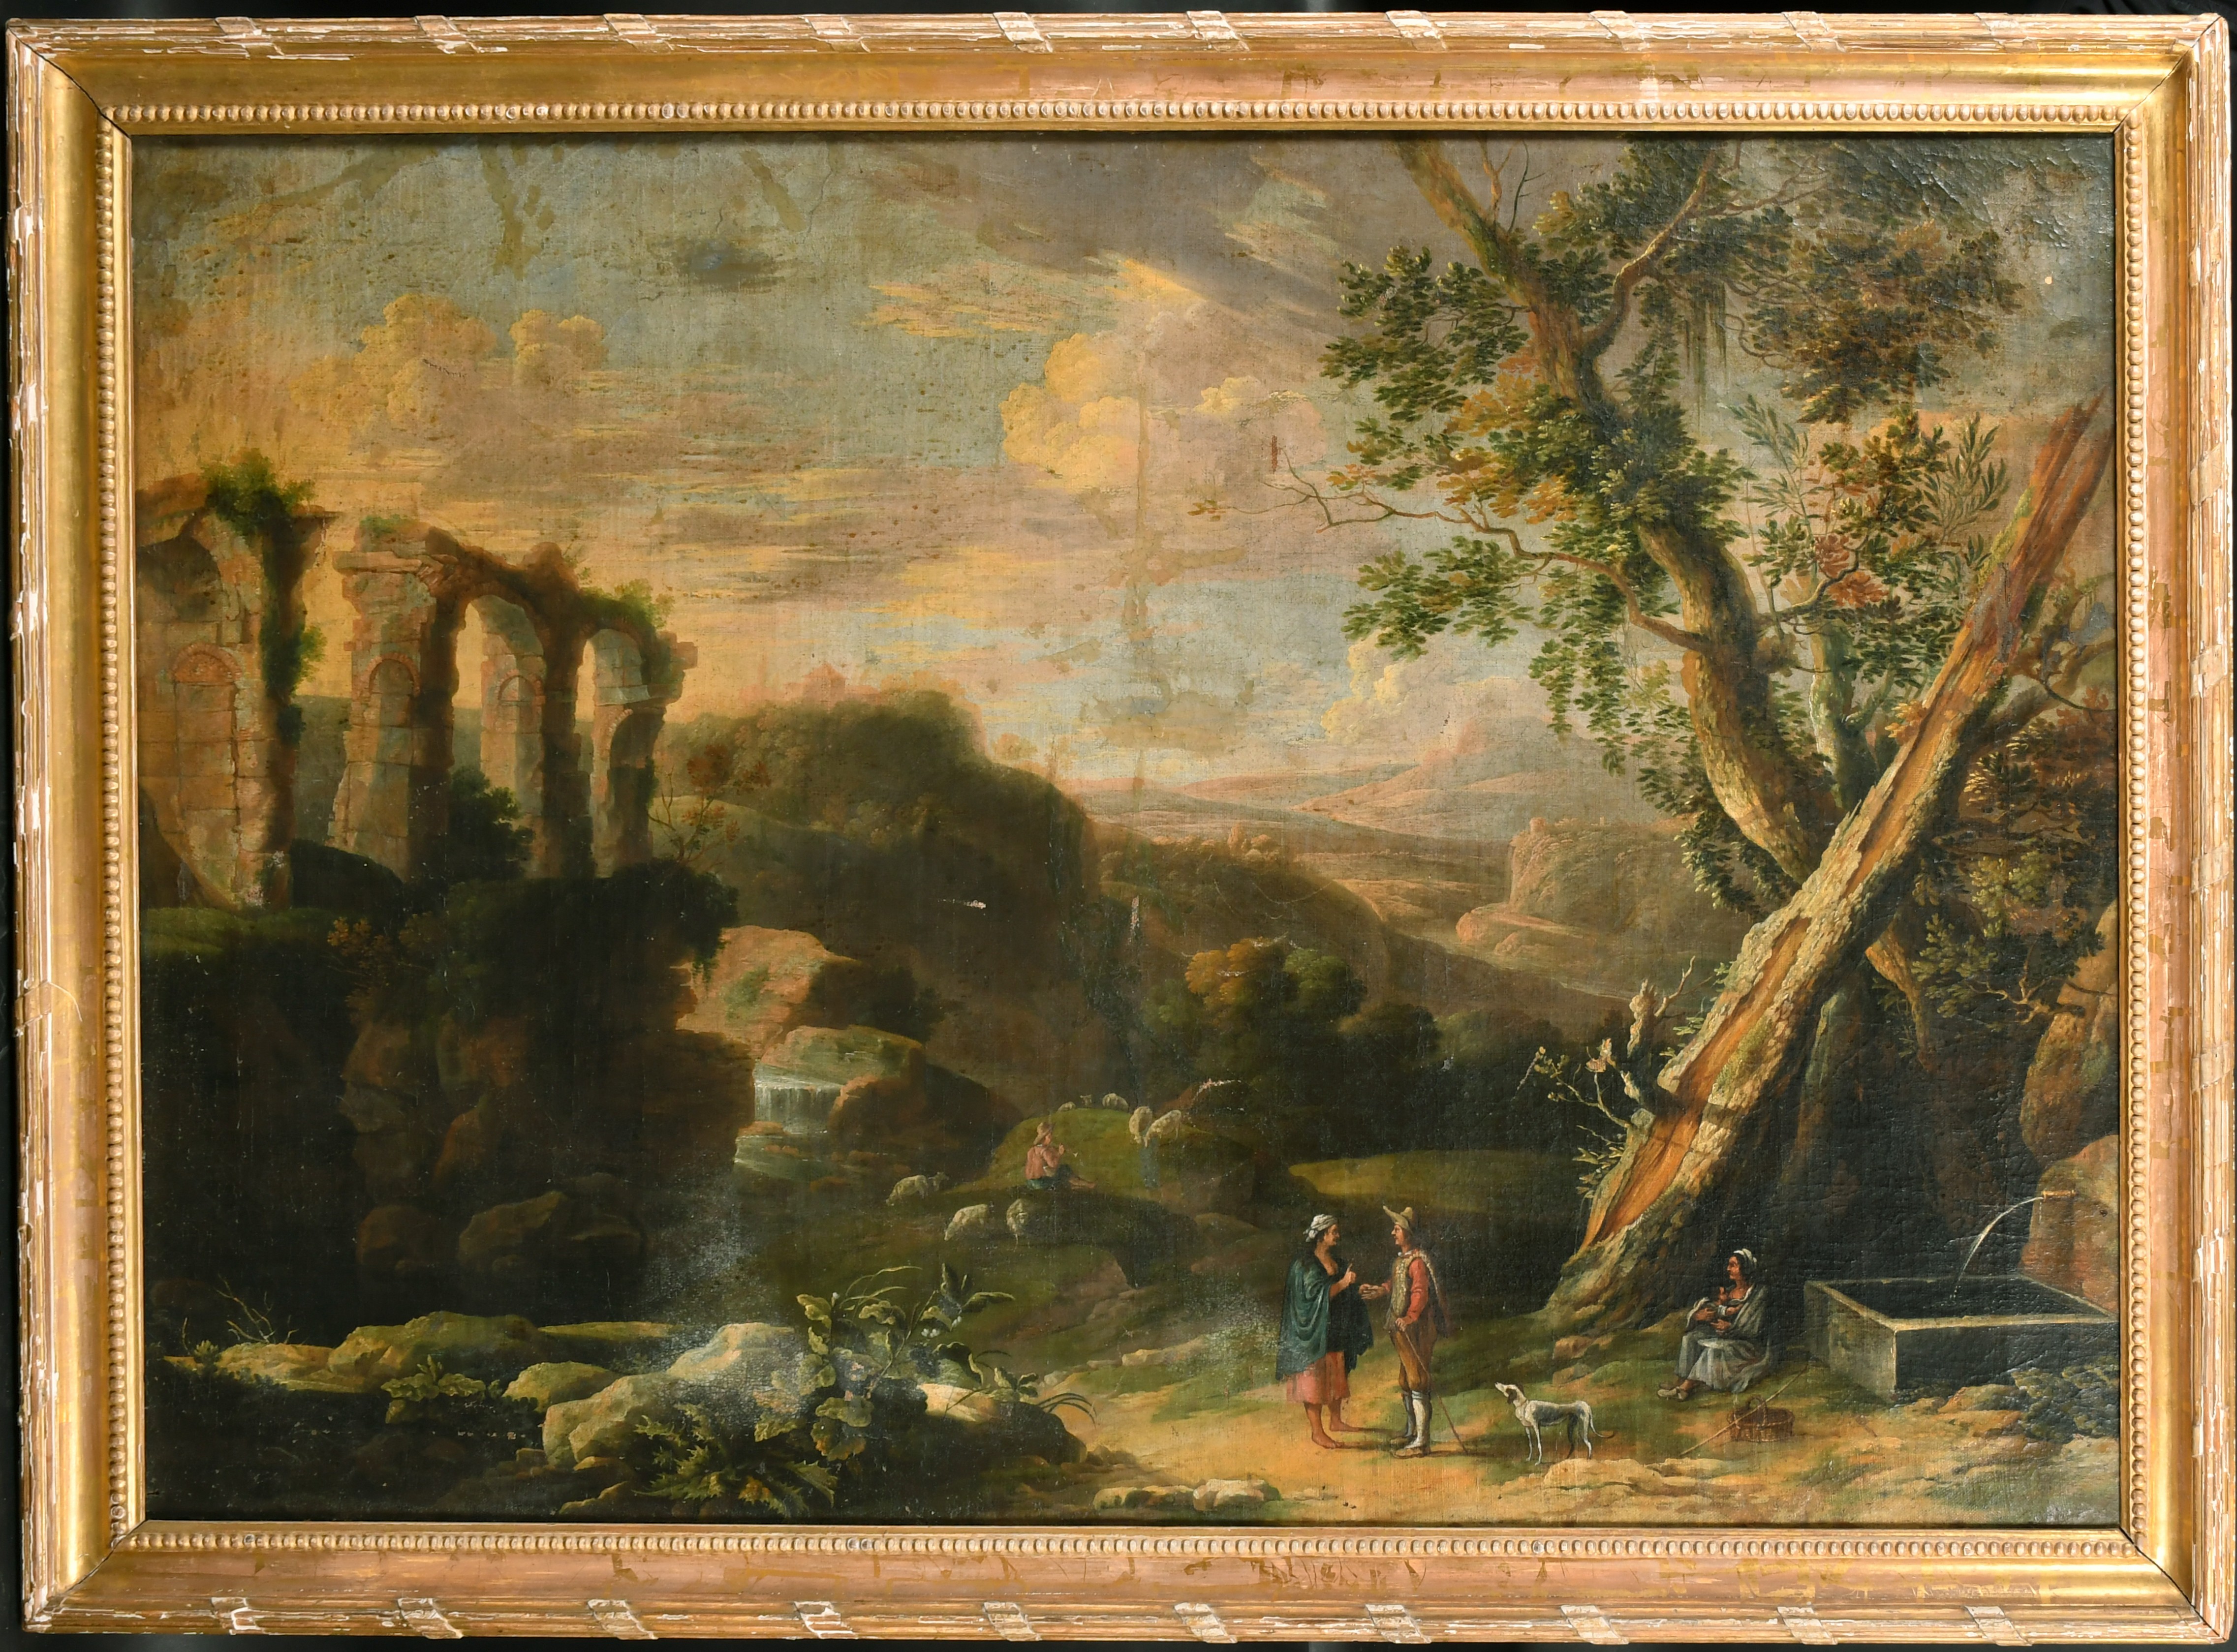 17th Century Italian School. Figures in a Classical Landscape, Oil on canvas, 32" x 46.25" (81.3 x - Image 2 of 3